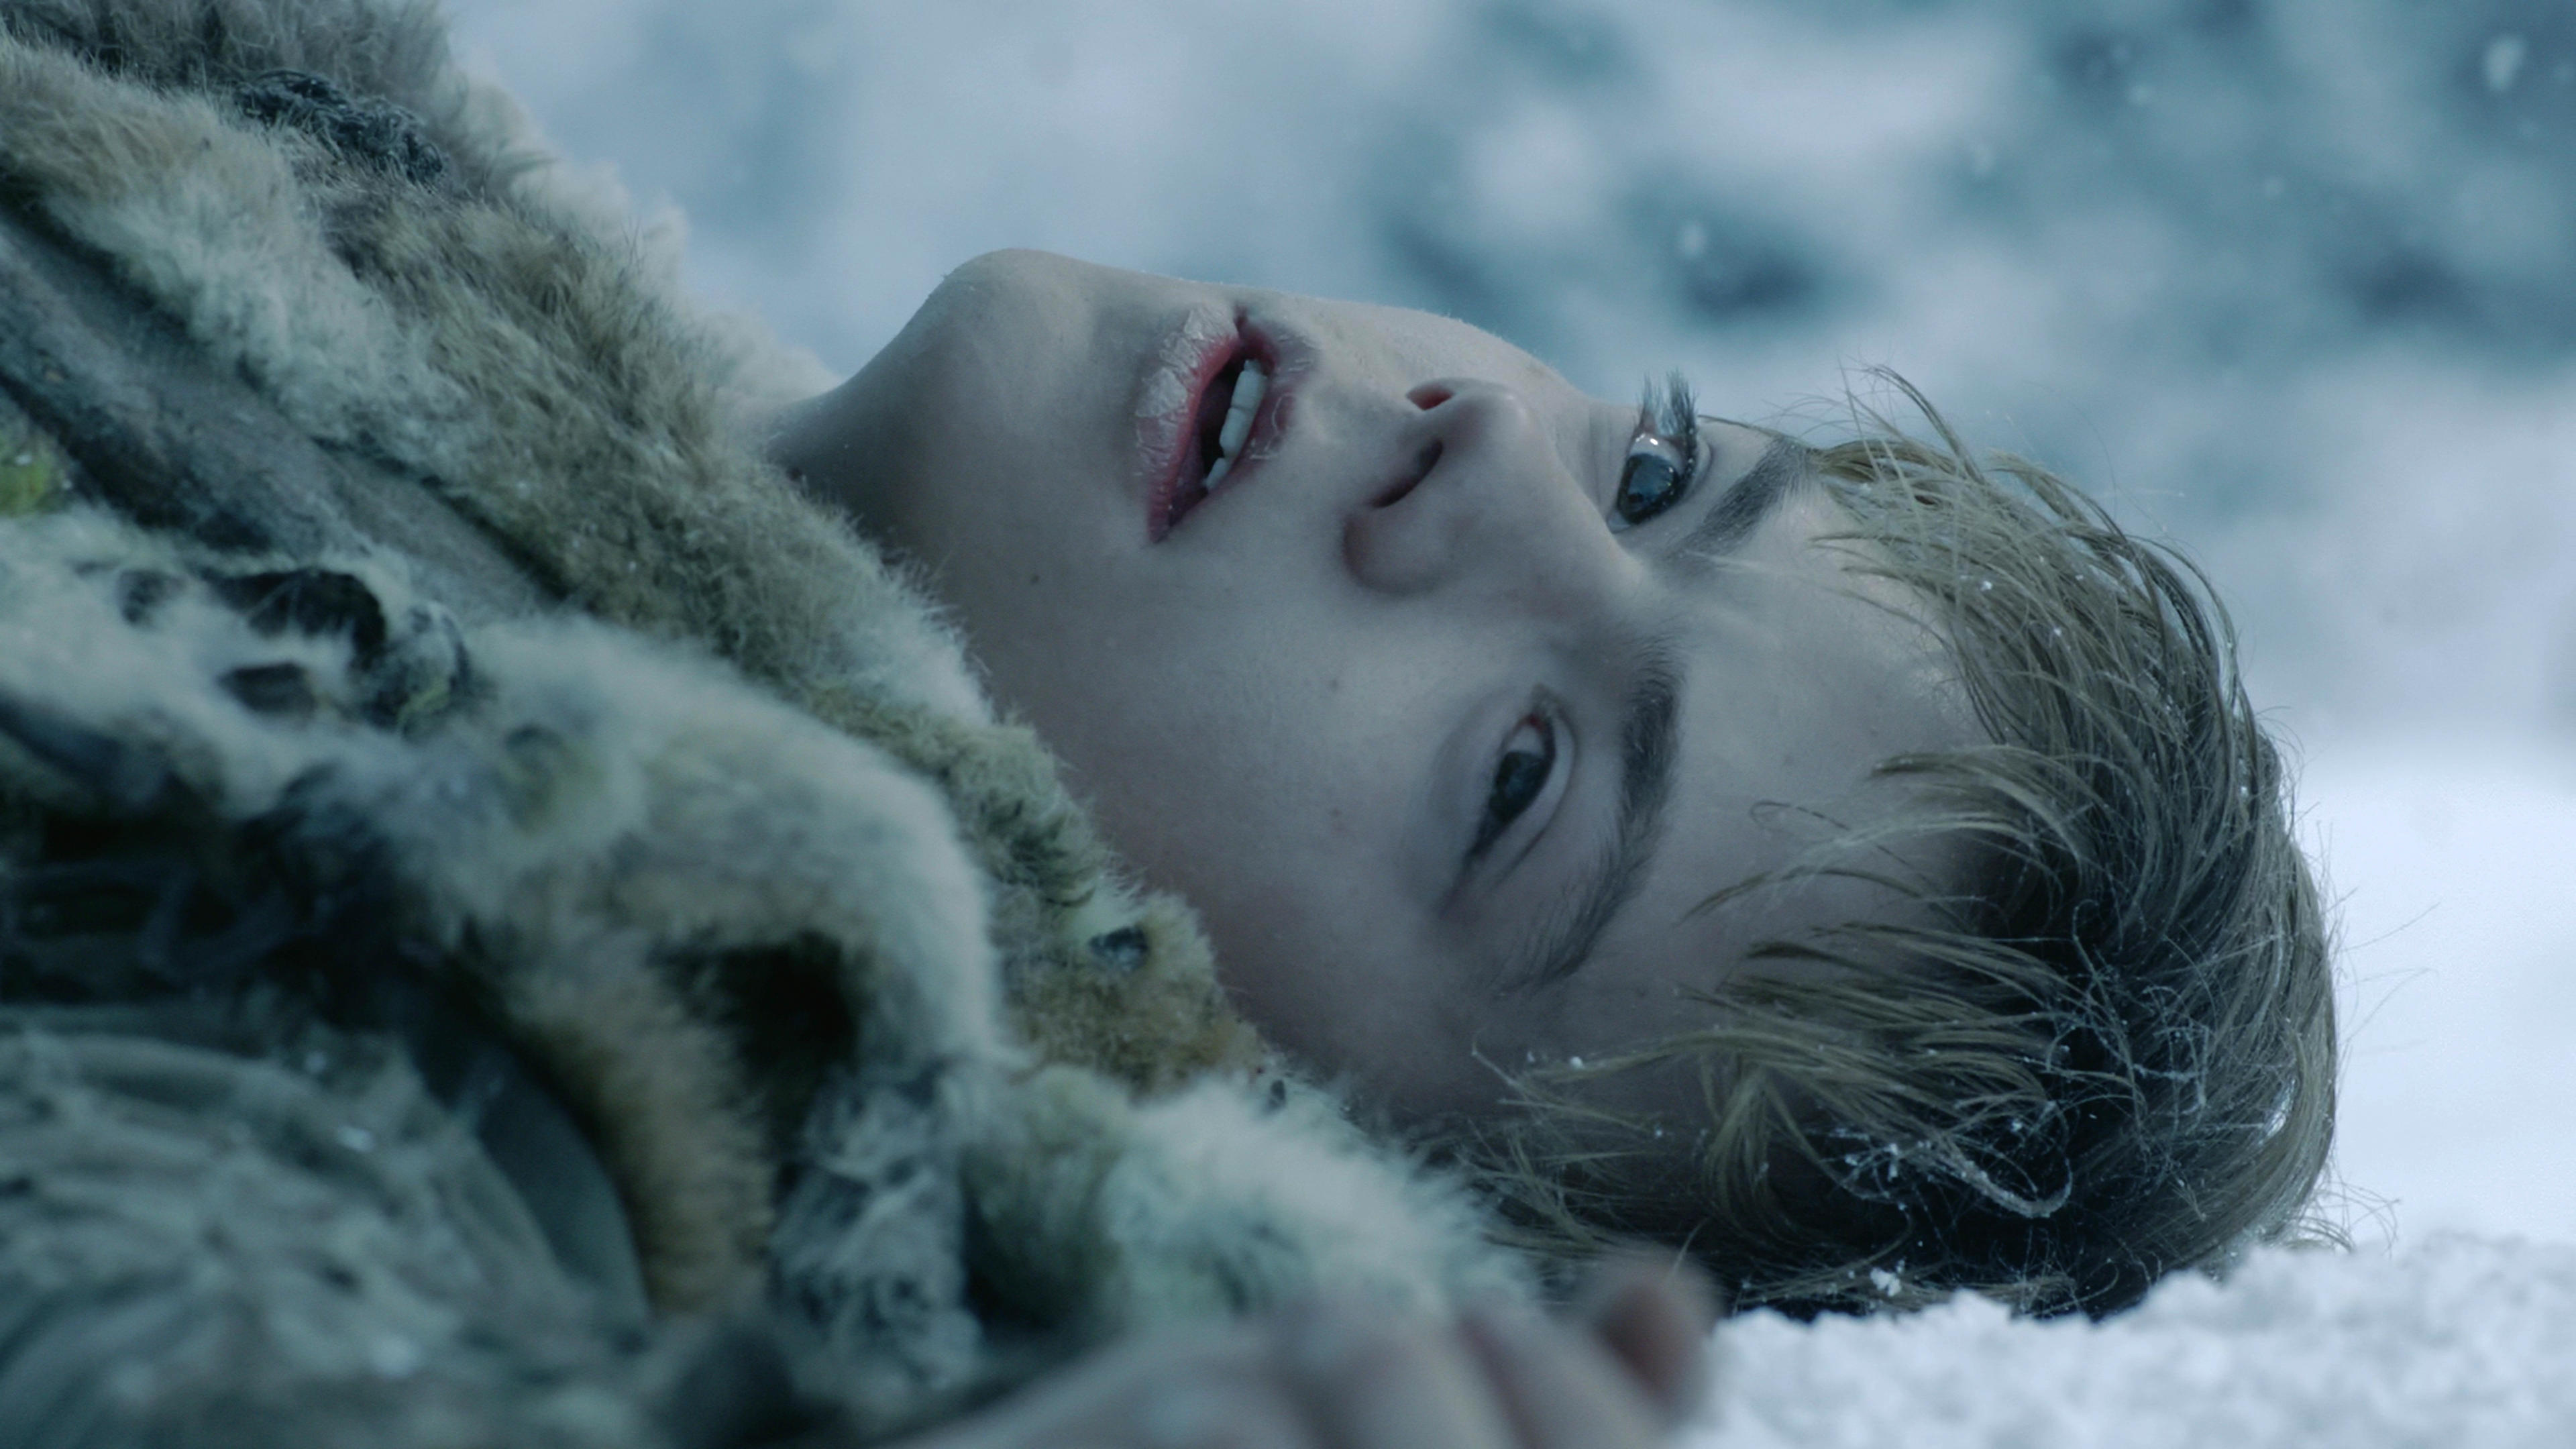 thomas brodie-sangster game of thrones